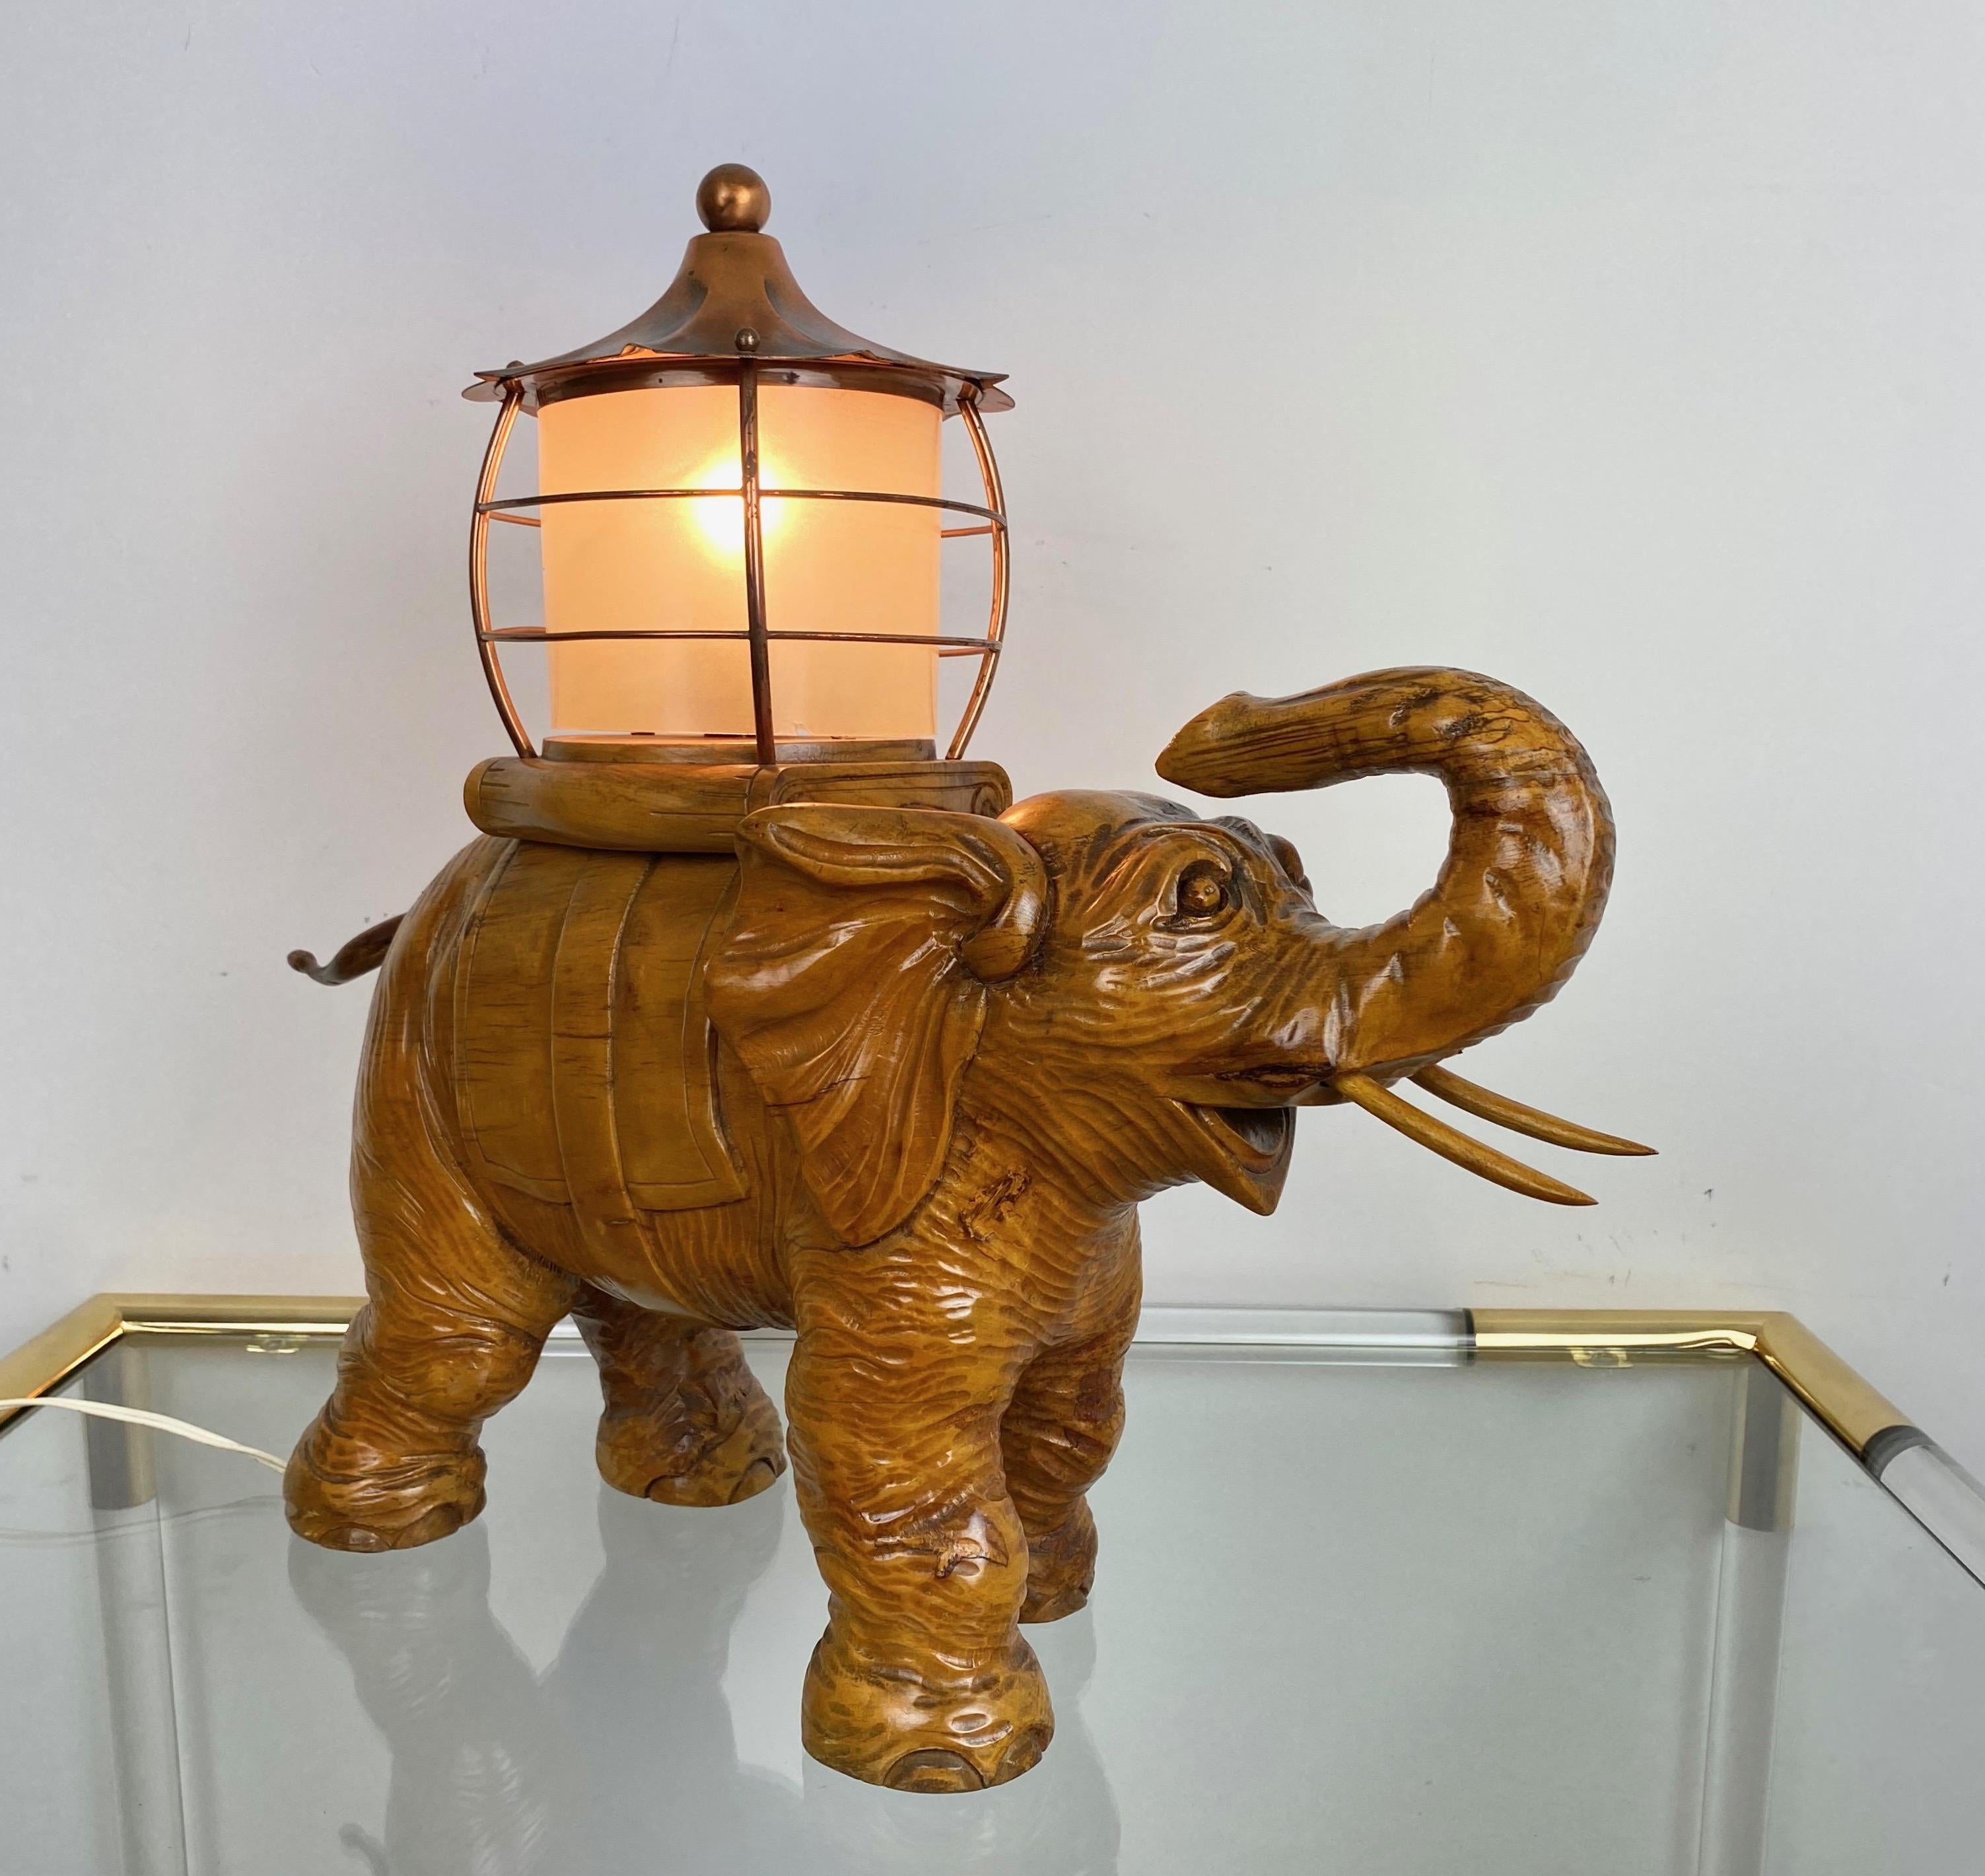 Mid-Century Modern Elephant Table Lamp Hand Carved Wood and Copper Aldo Tura for Macabo Italy 1950s For Sale